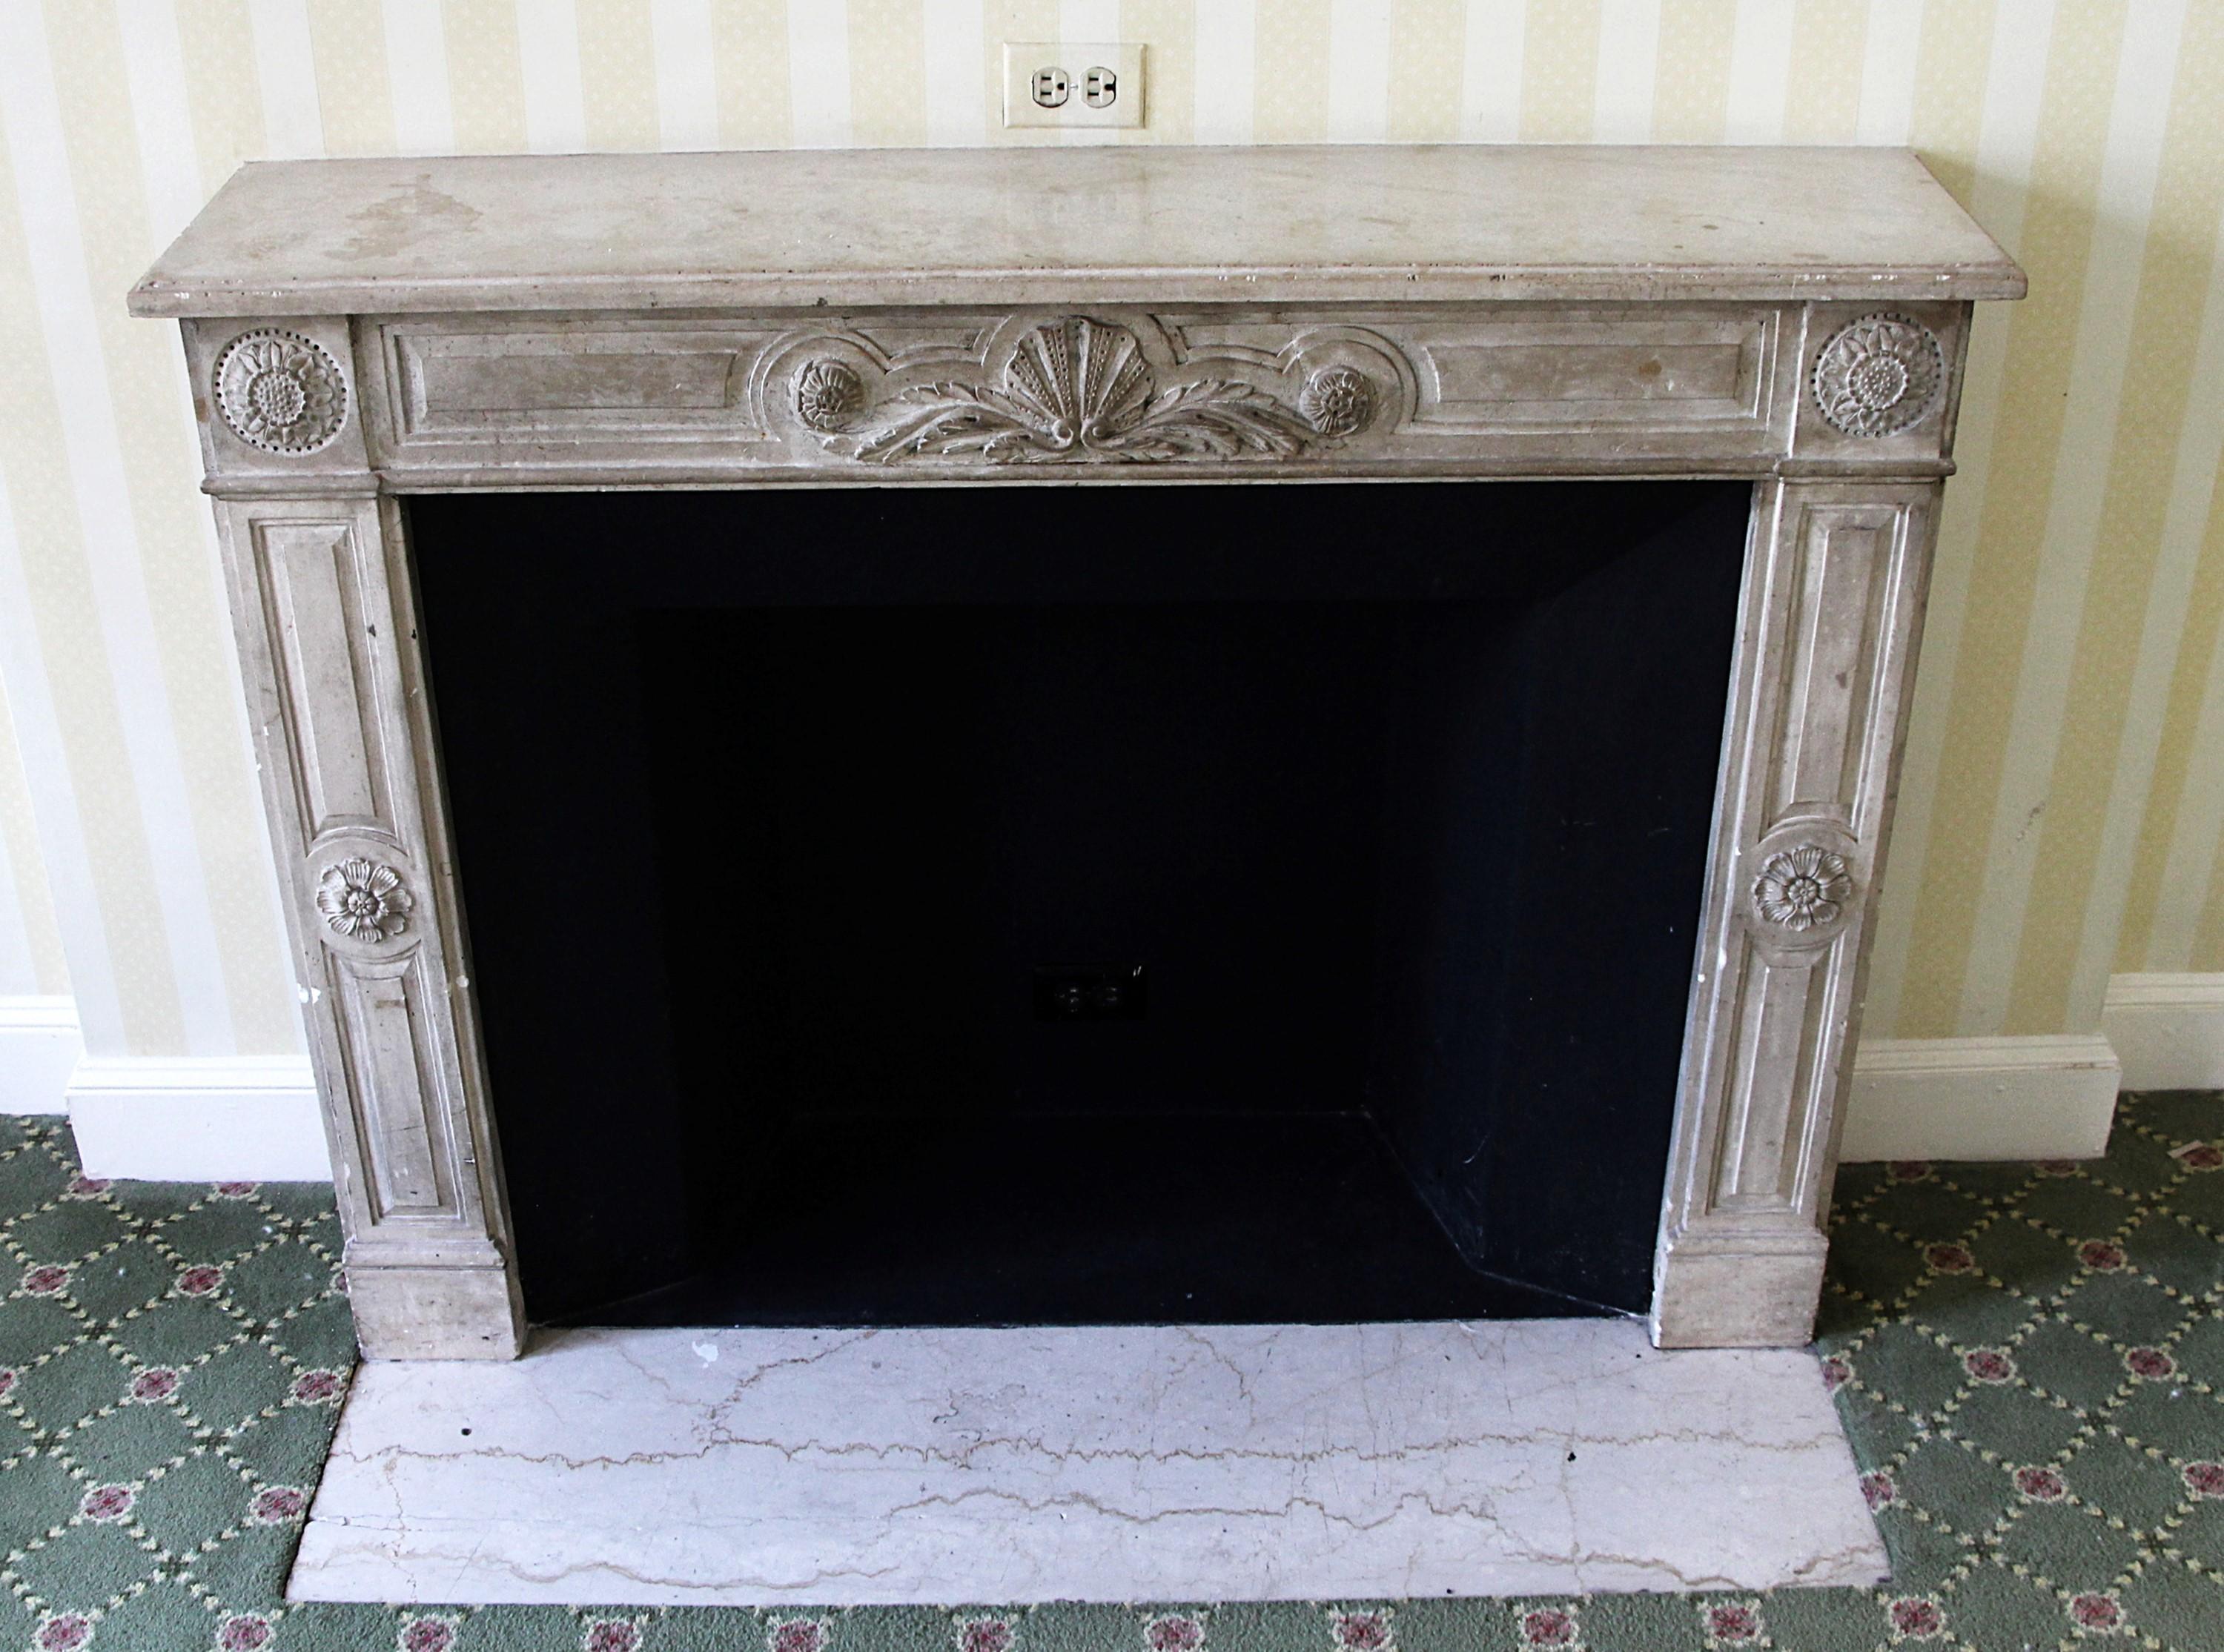 20th Century Waldorf Astoria Hotel Carved Limestone Mantel Floral Shell Details For Sale